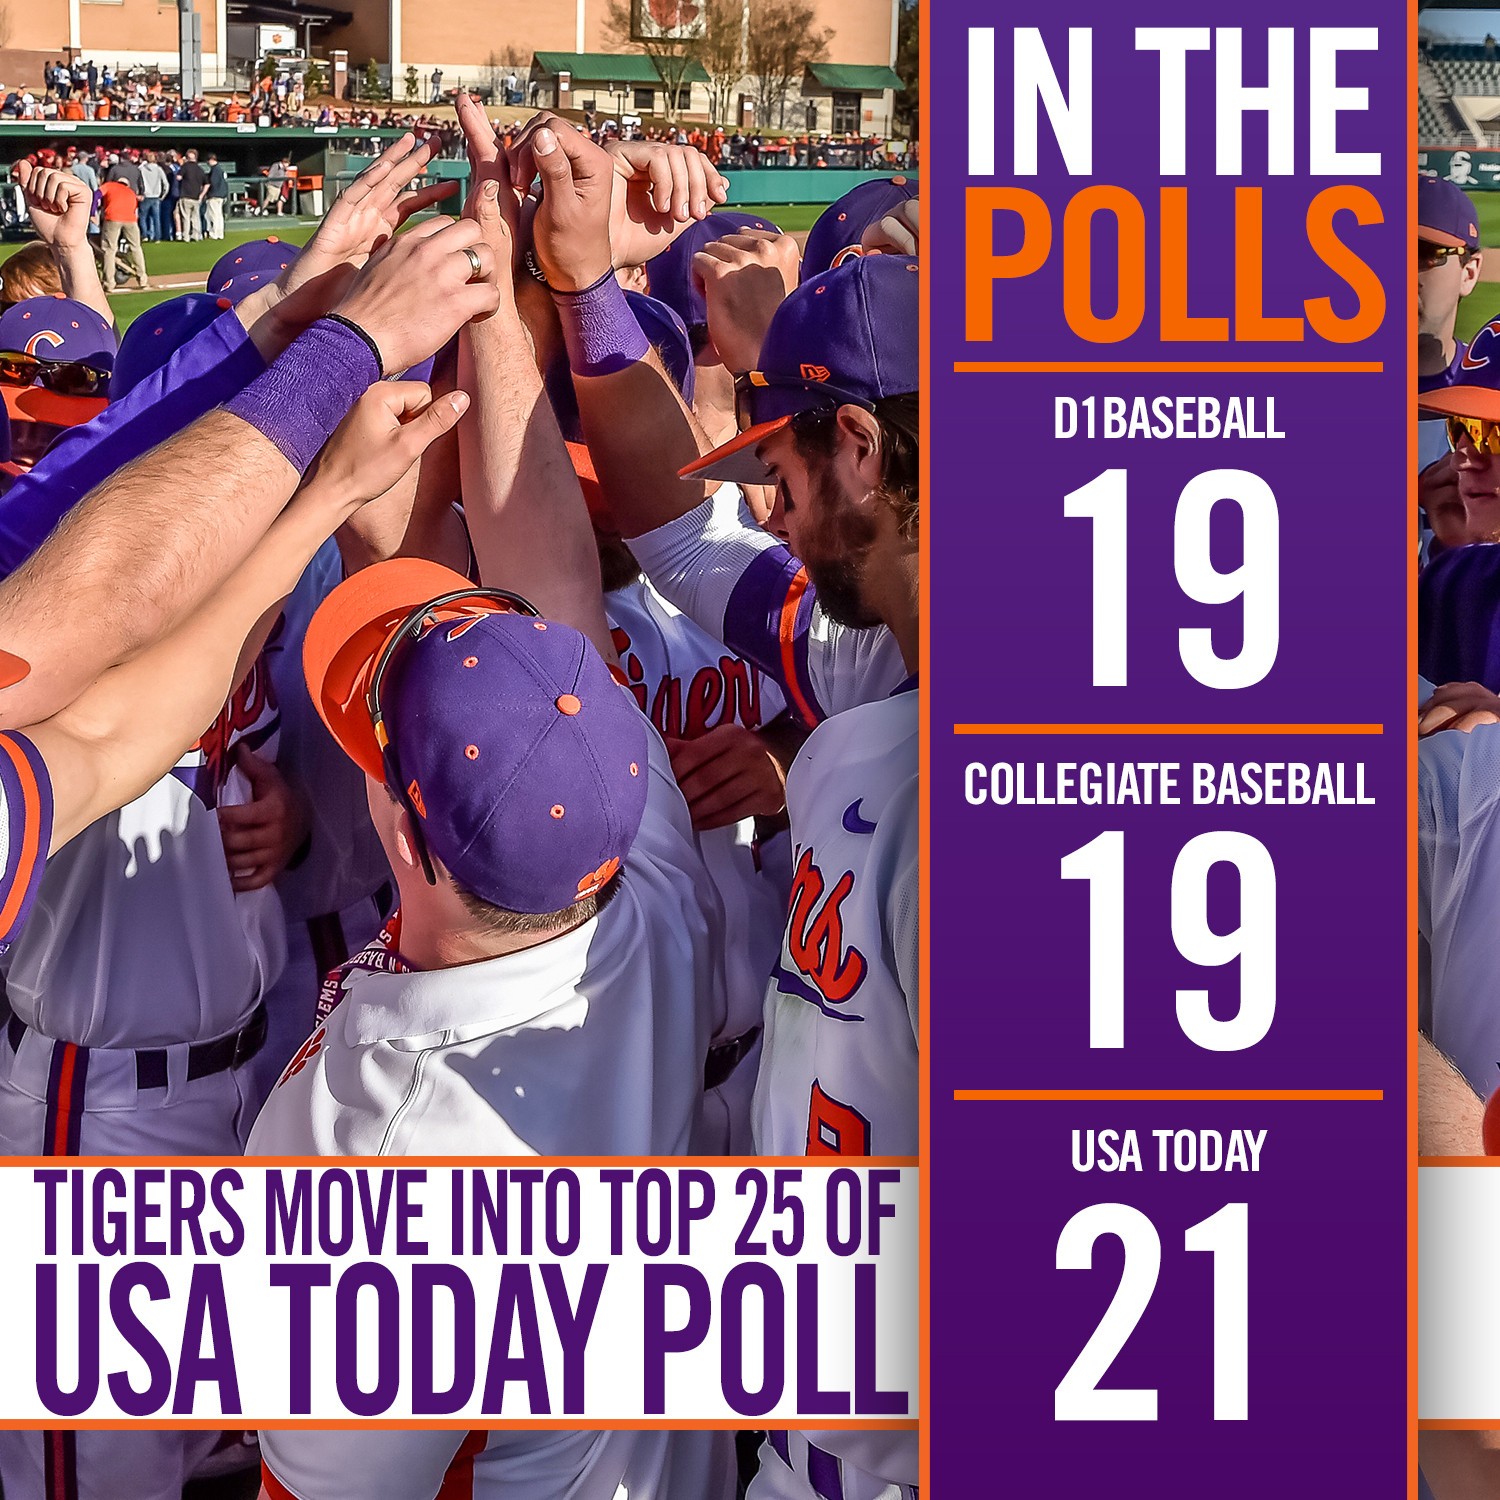 Tigers Move Up in the Polls